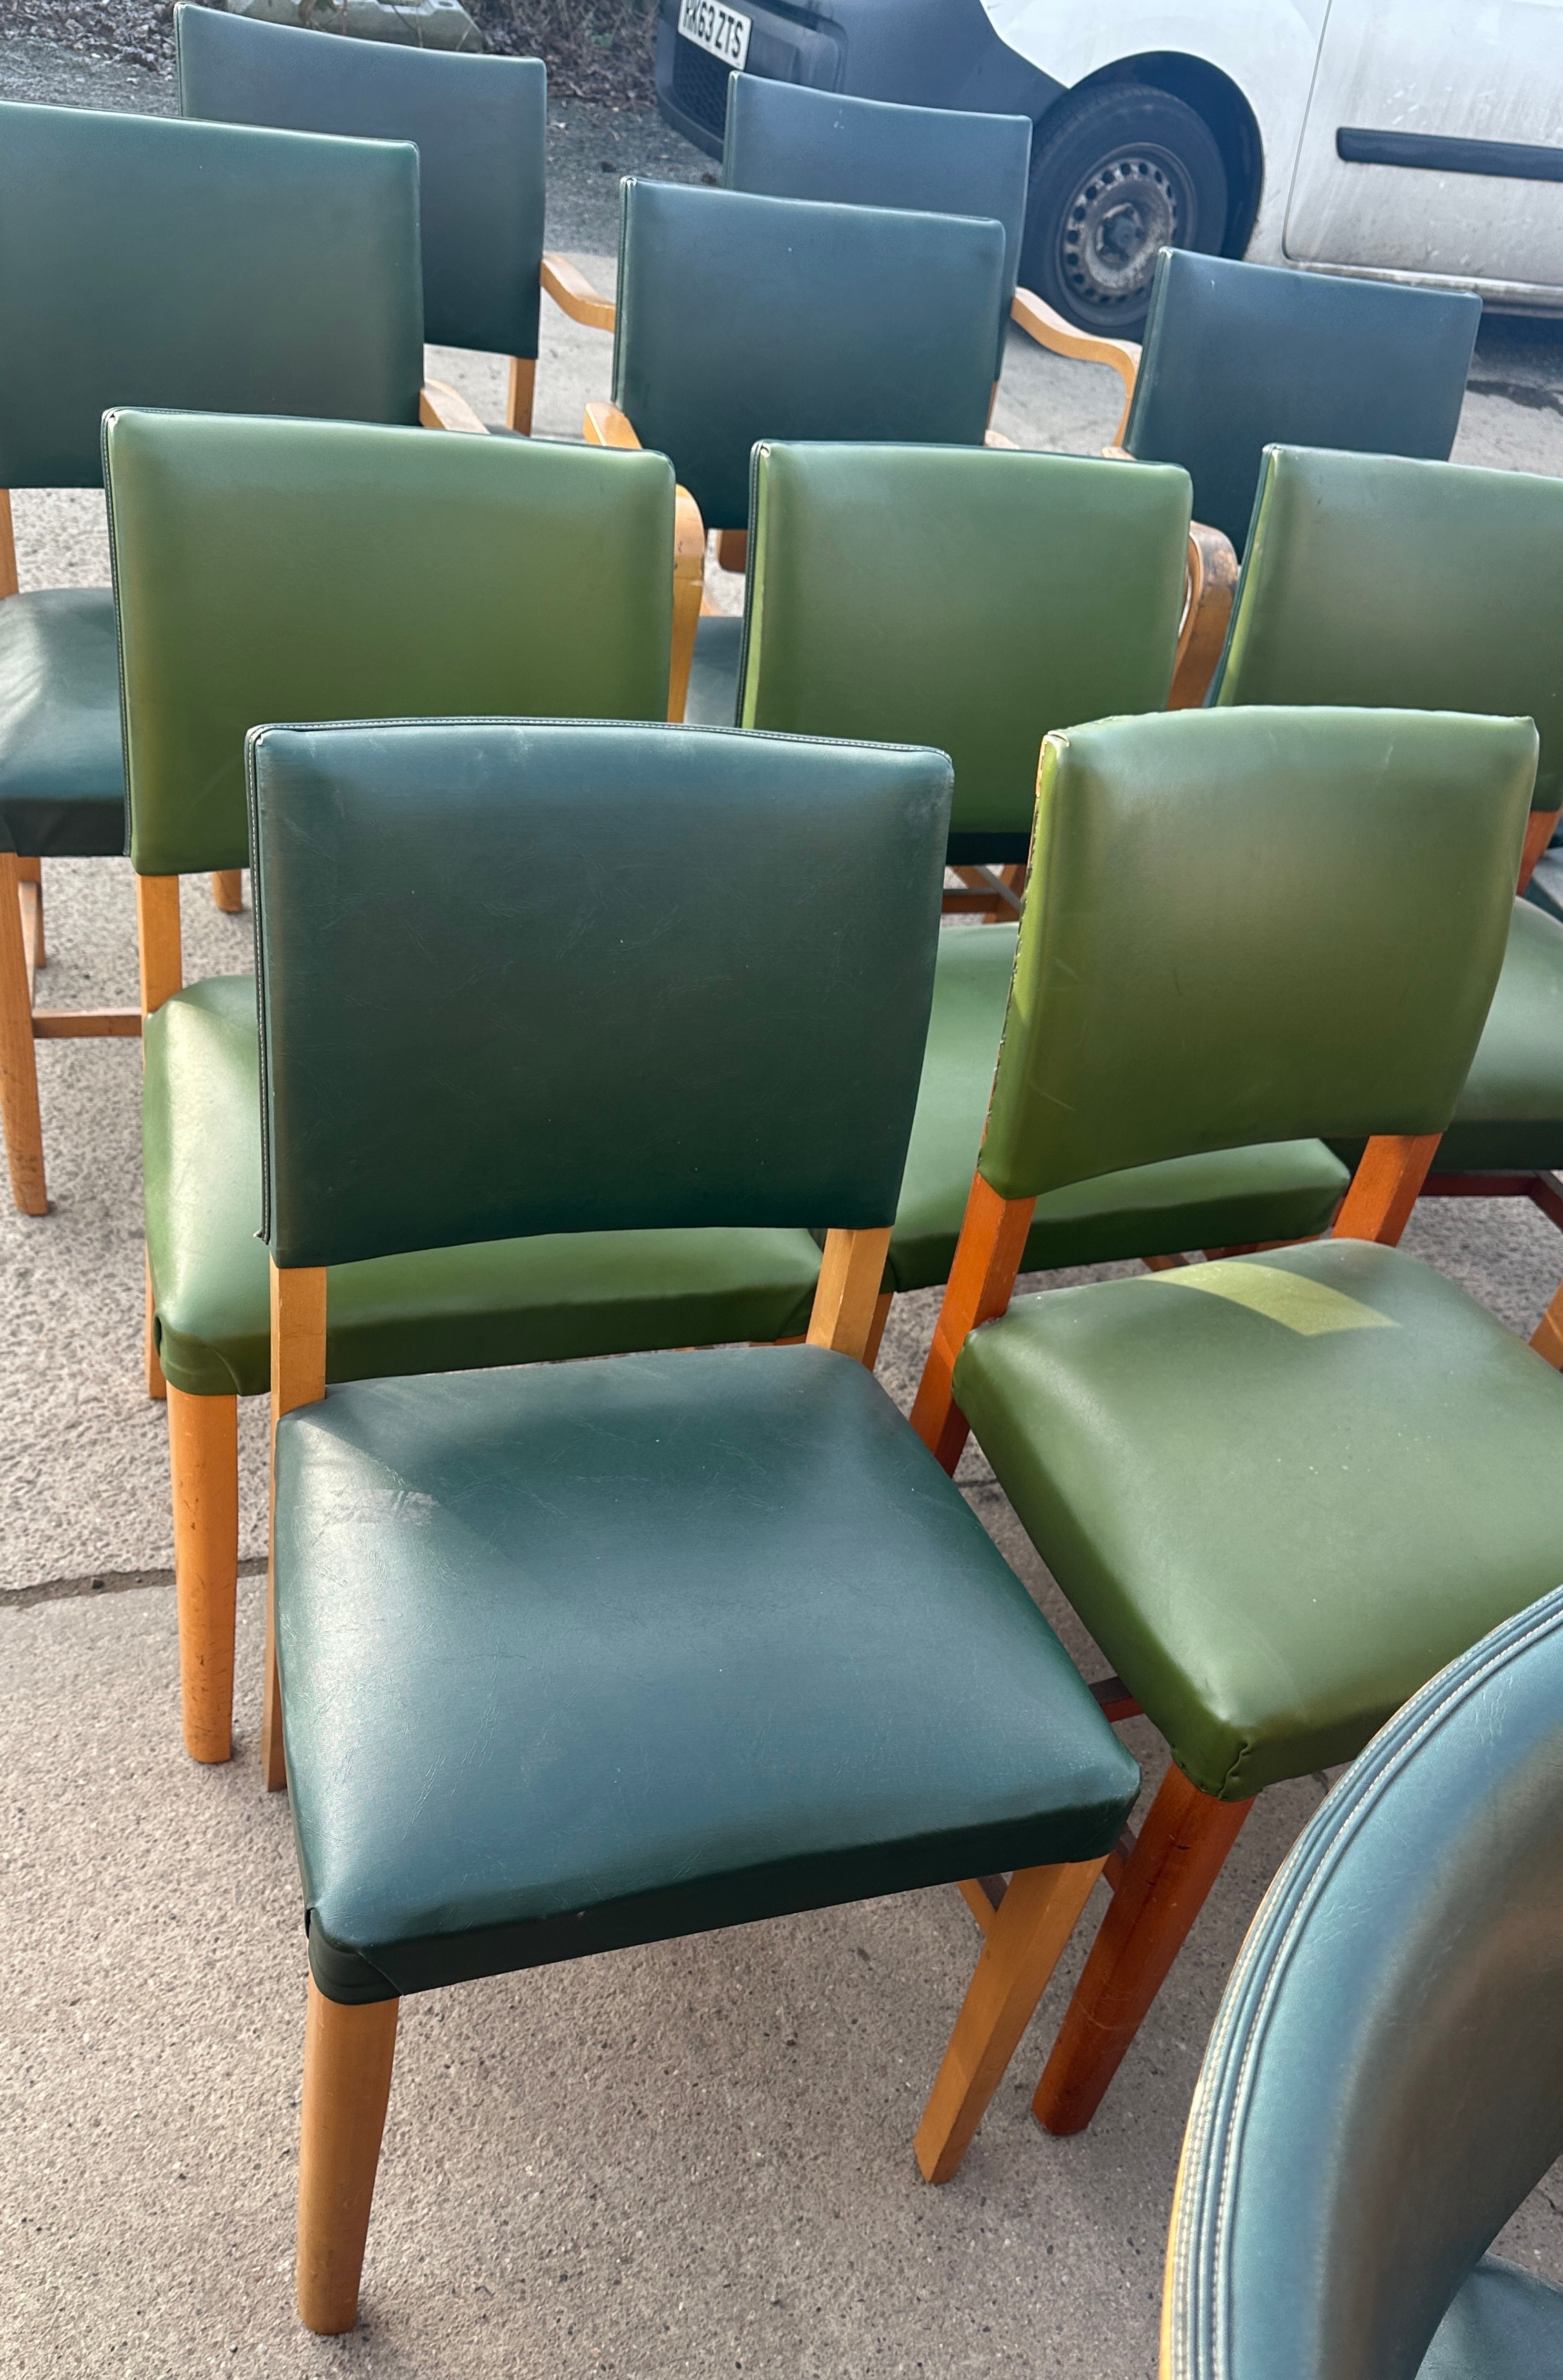 verco vintage board room chairs 16 in total 10 with arms - Image 4 of 4